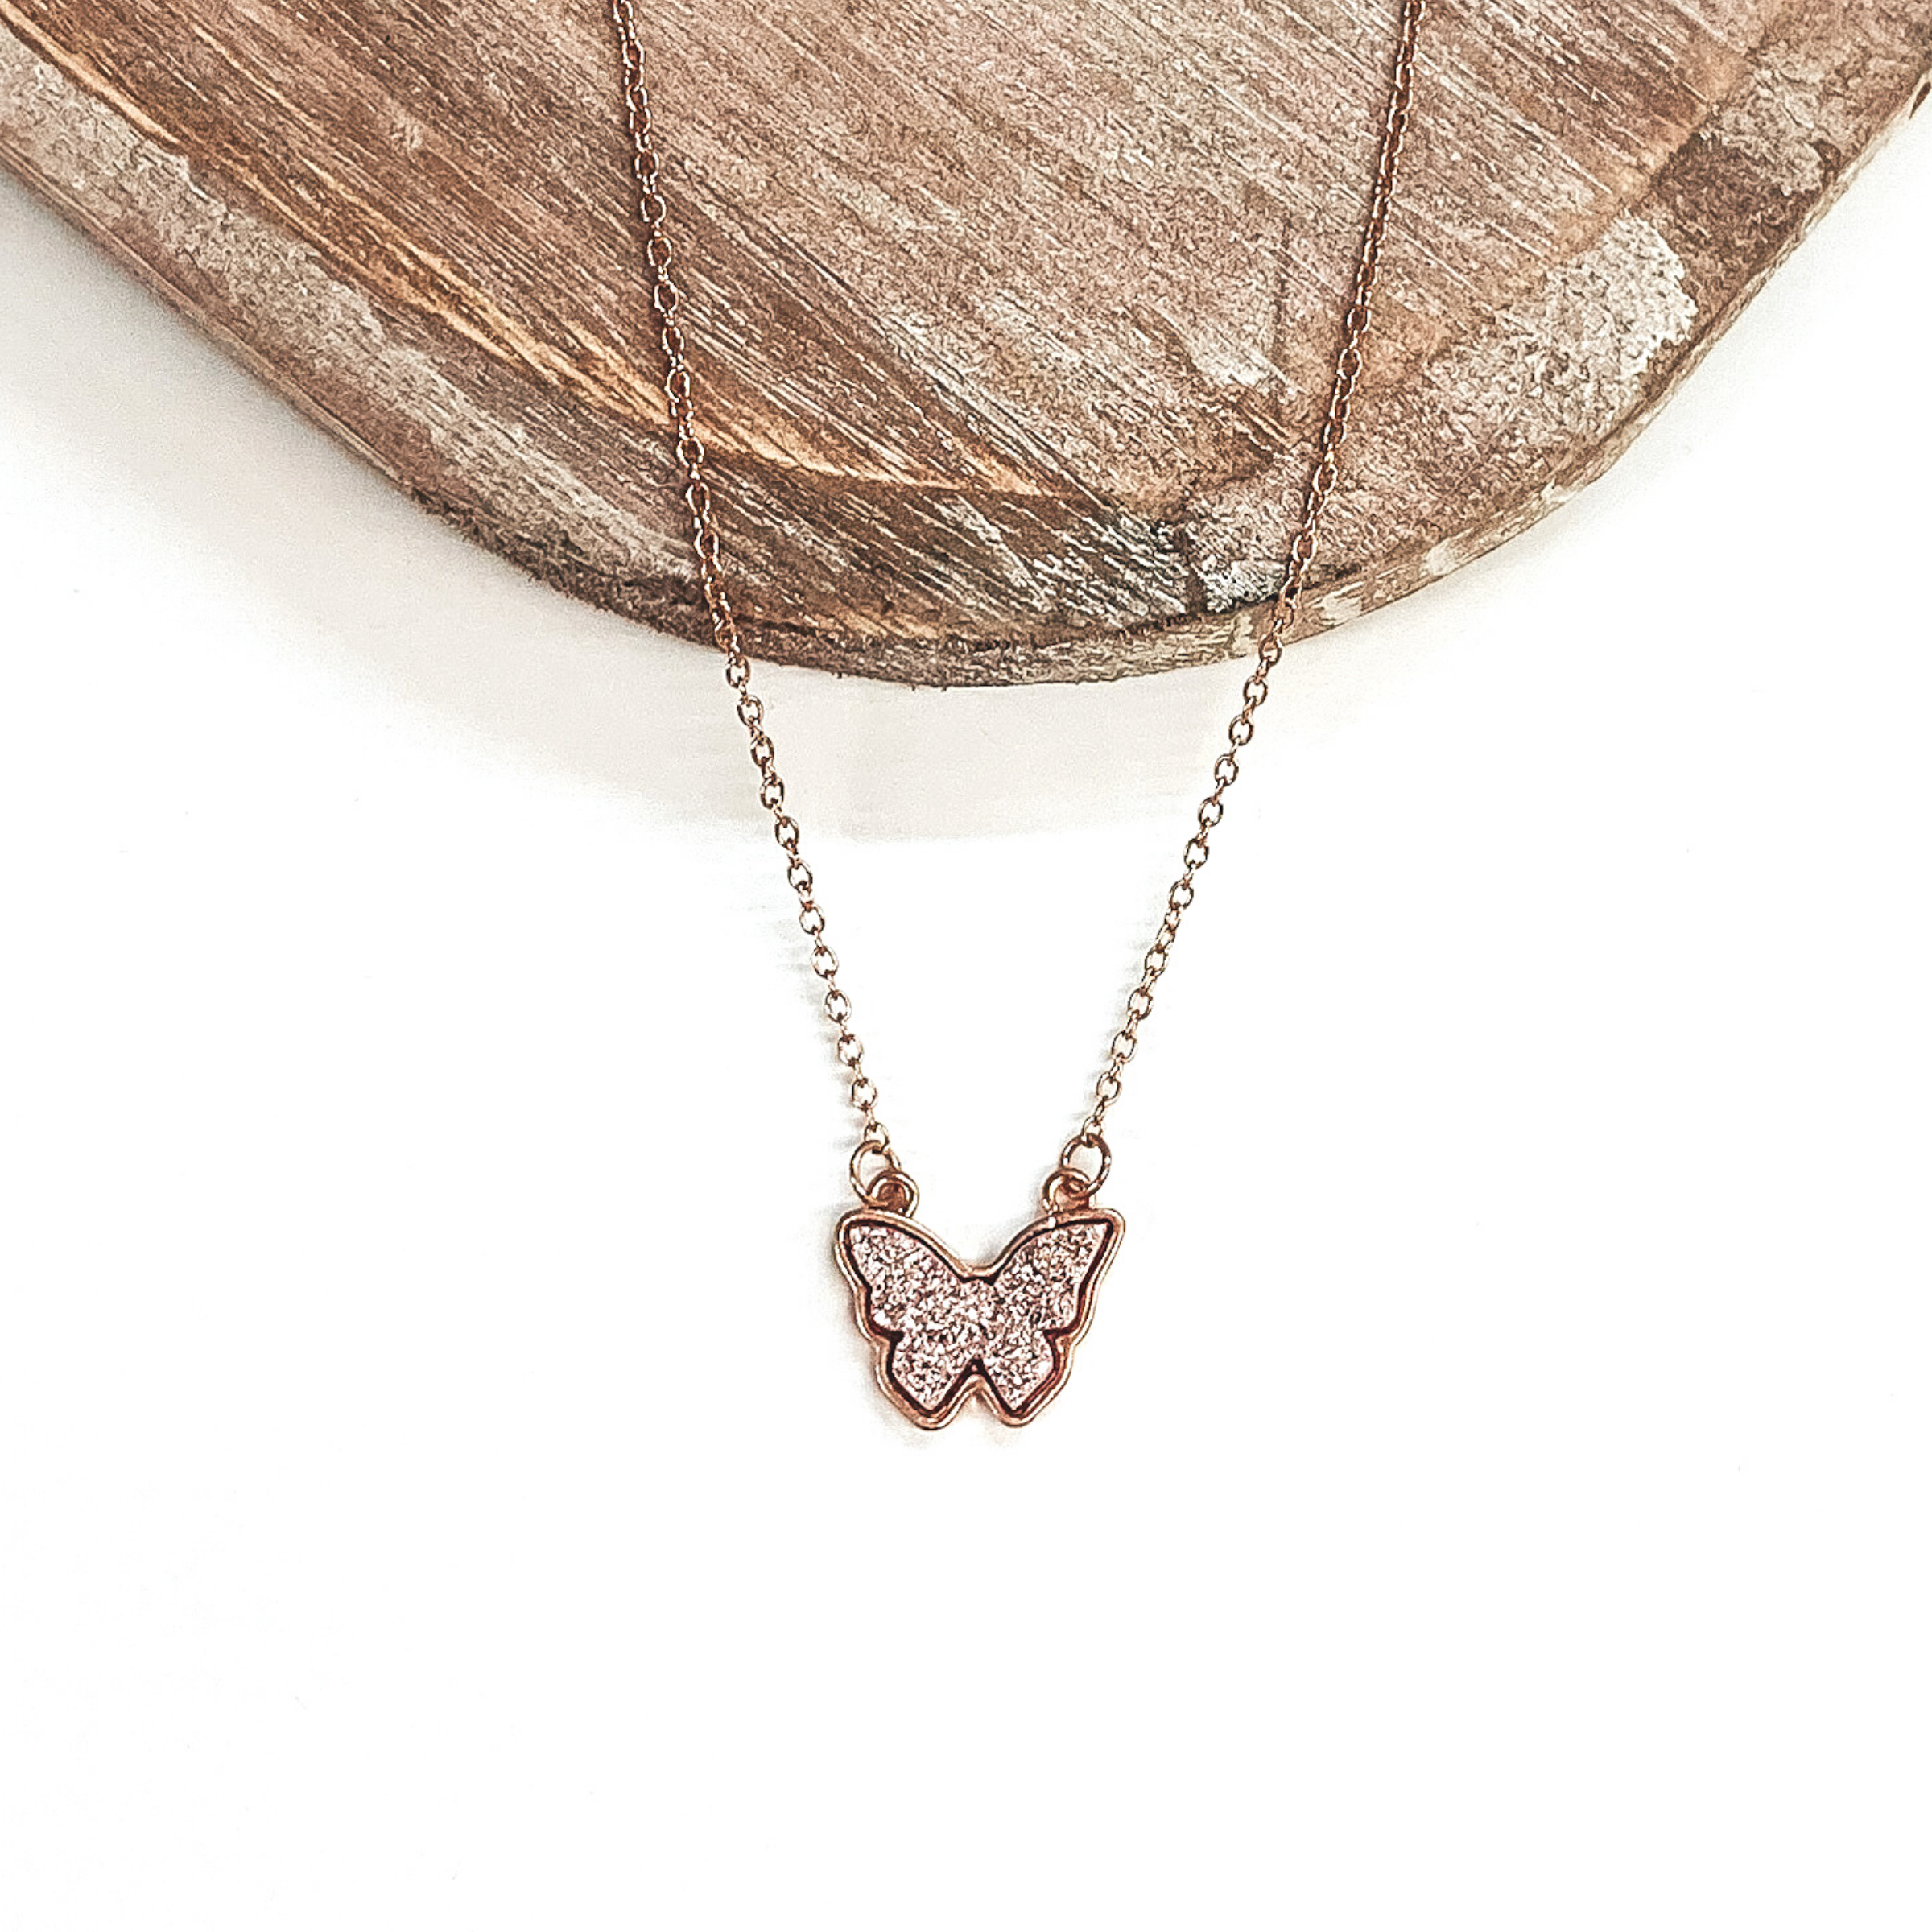 Gold necklace with rose gold druzy butterfly pendant. Pictured on a white and brown background.